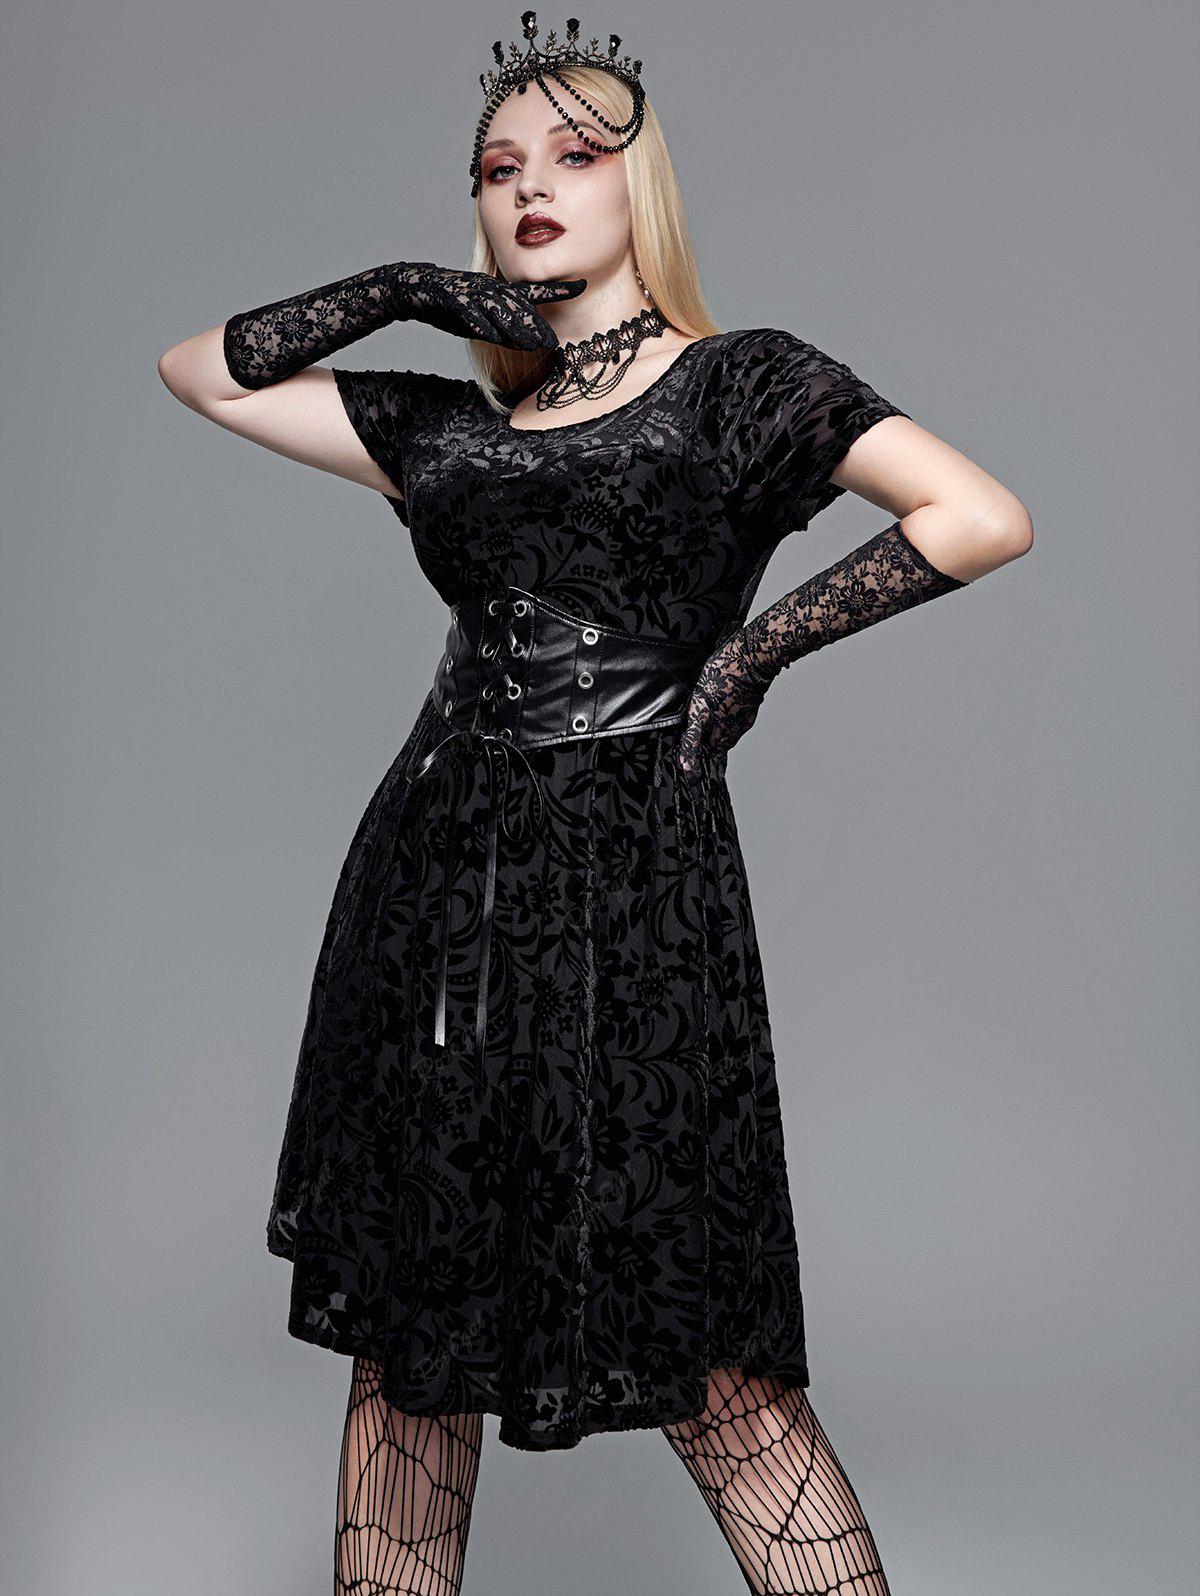 💗Lilith Loves💗 Victorian Gothic Jacquard PU Grommets Lace-up Corset Dress